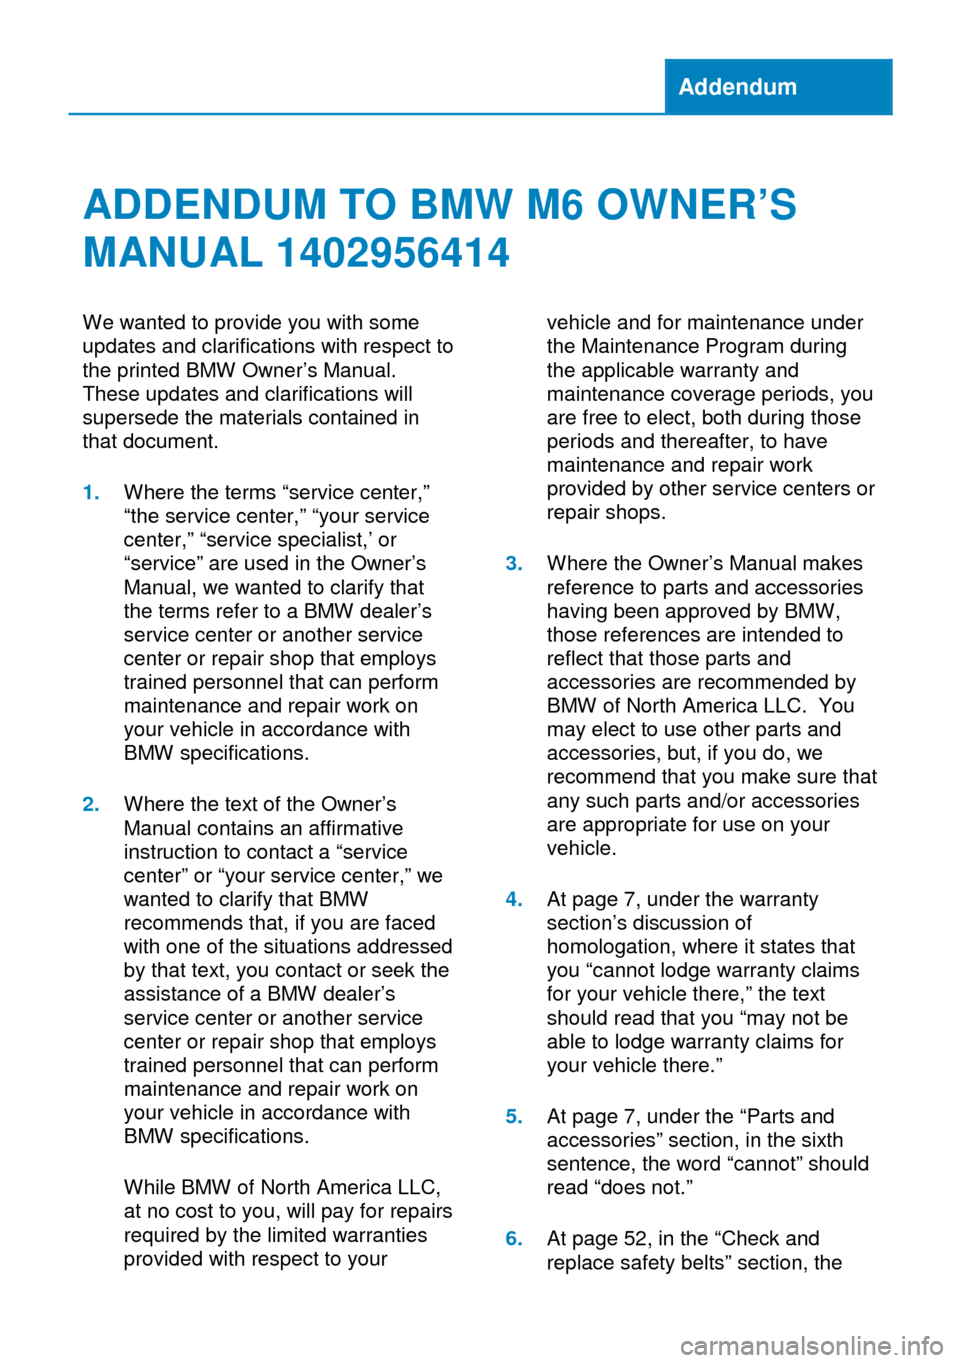 BMW M6 COUPE 2014 F13M Owners Manual Addendum
ADDENDUM TO BMW M6 OWNER’S
MANUAL 1402956414
We wanted to provide you with some
updates and clarifications with respect to
the printed BMW Owner’s Manual.
These updates and clarifications